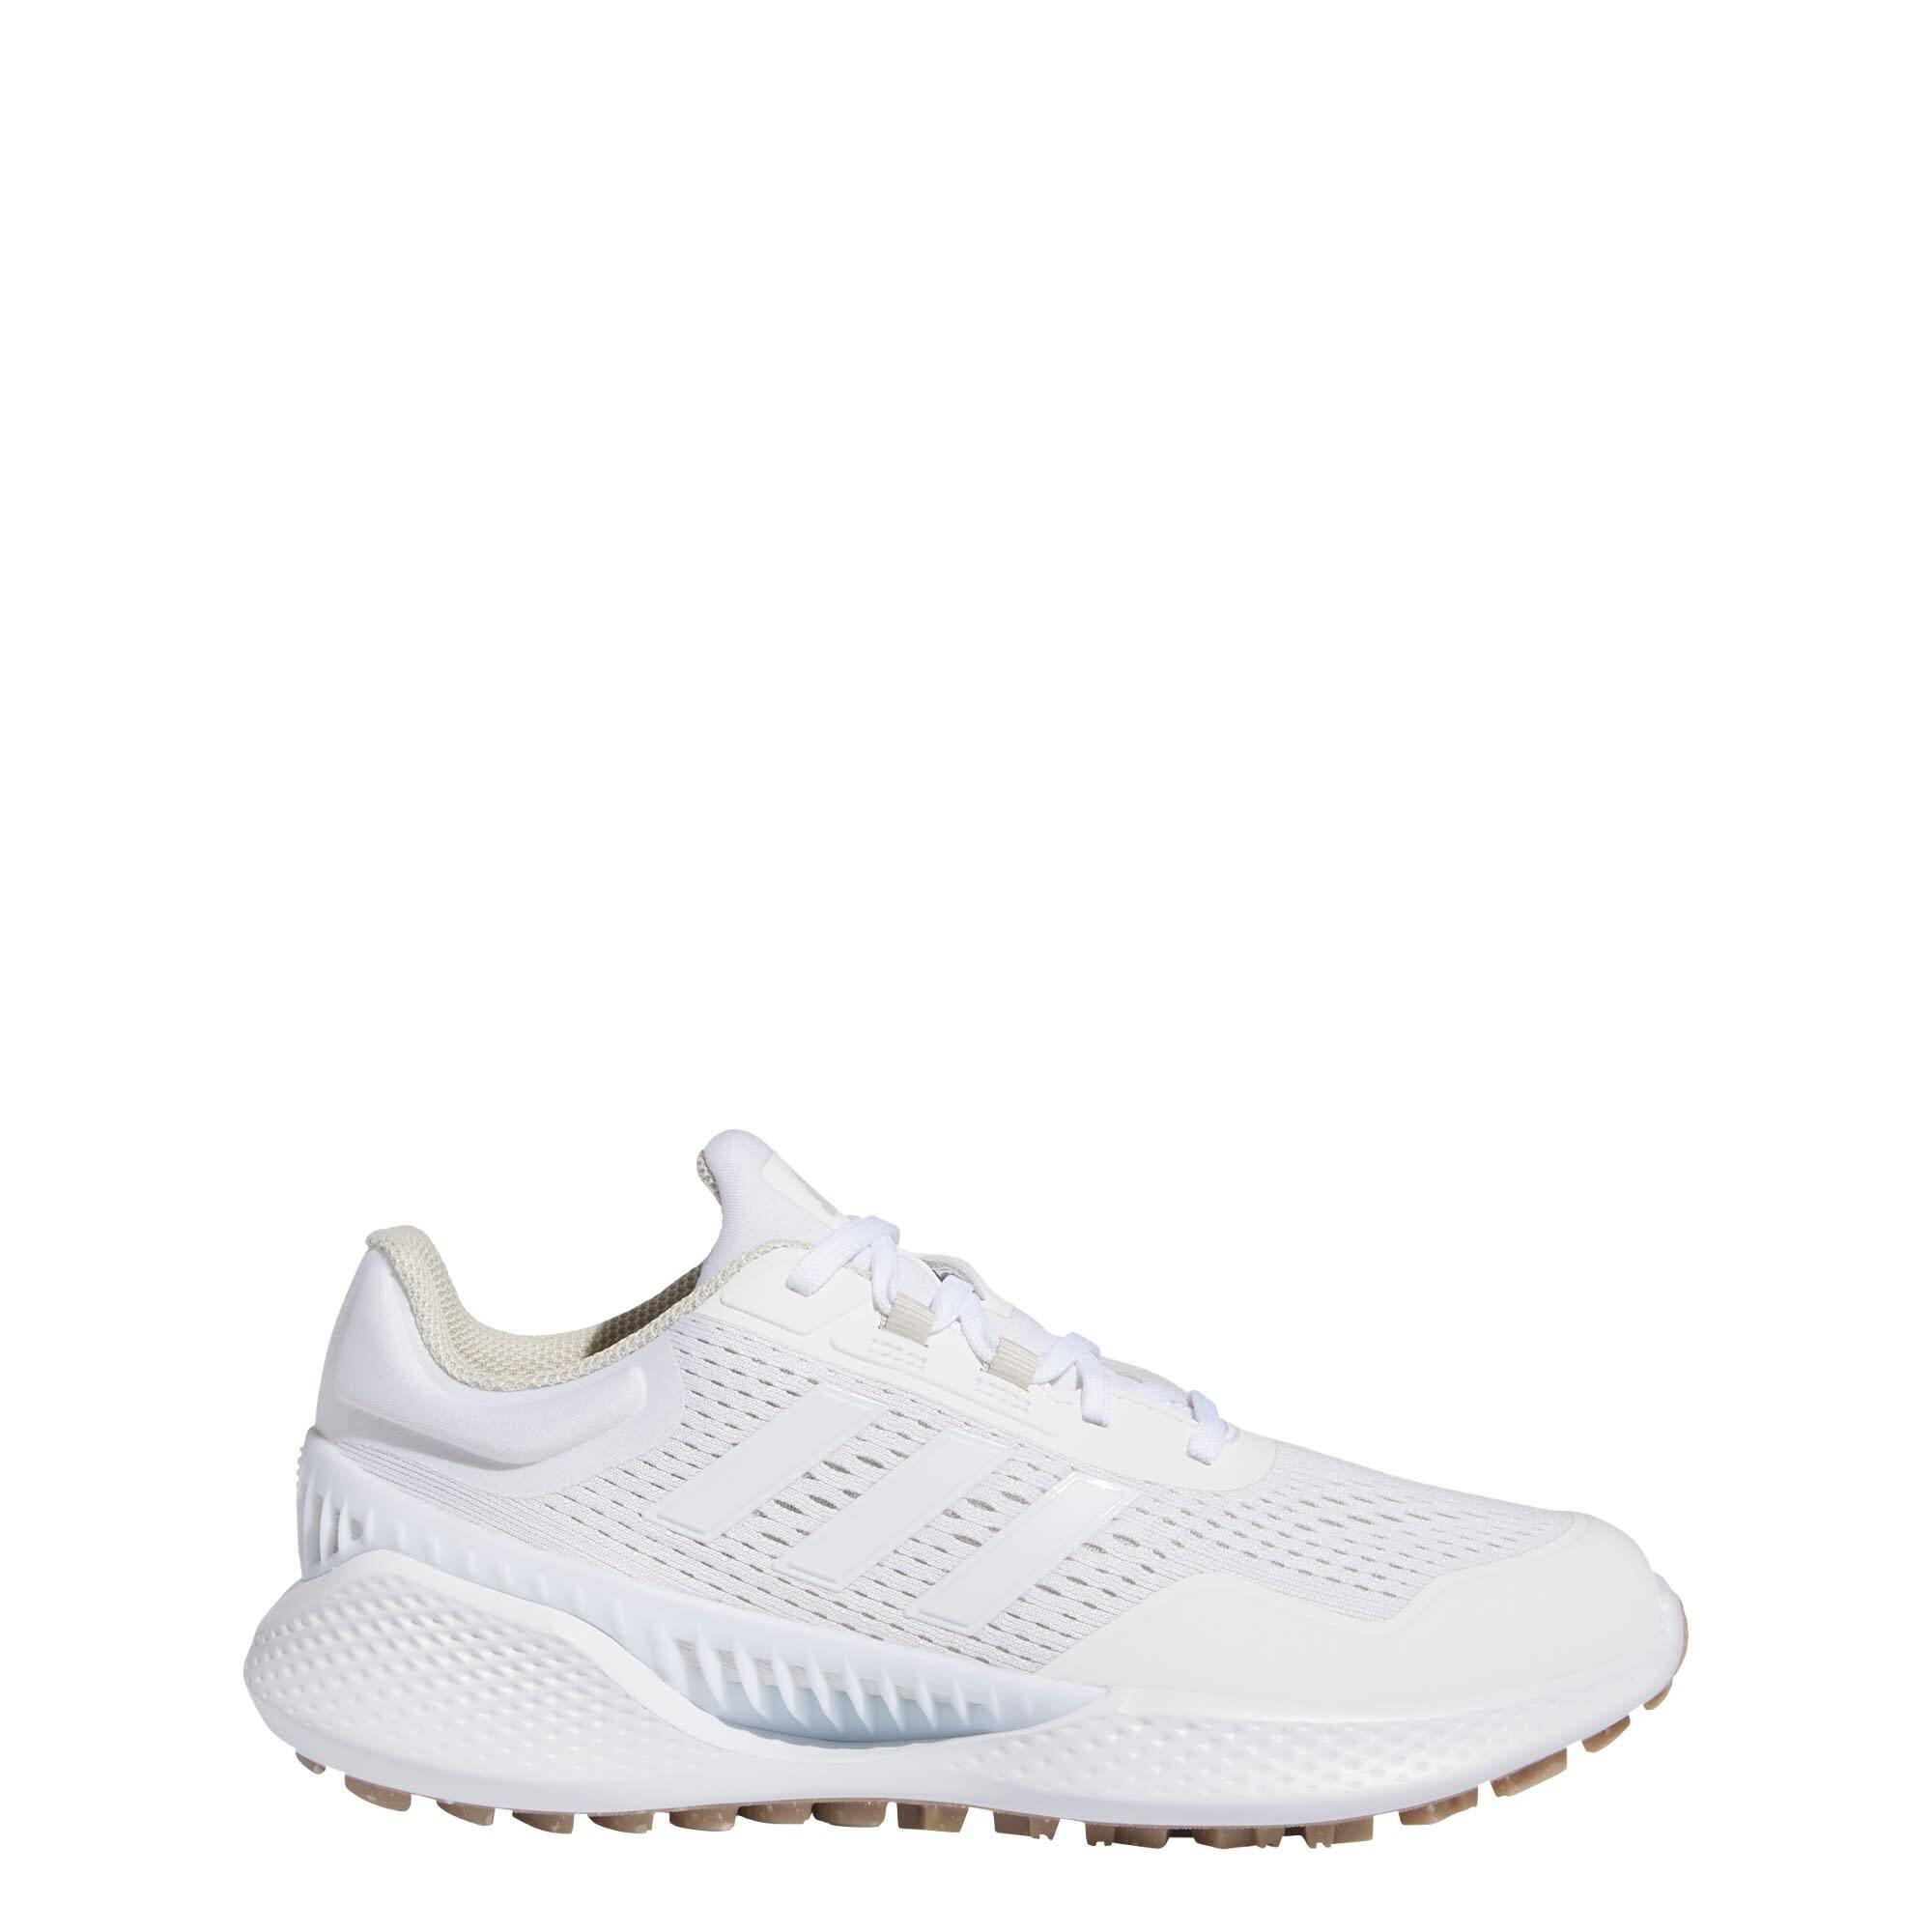 ADIDAS Summervent 24 Bounce Golf Shoes Low